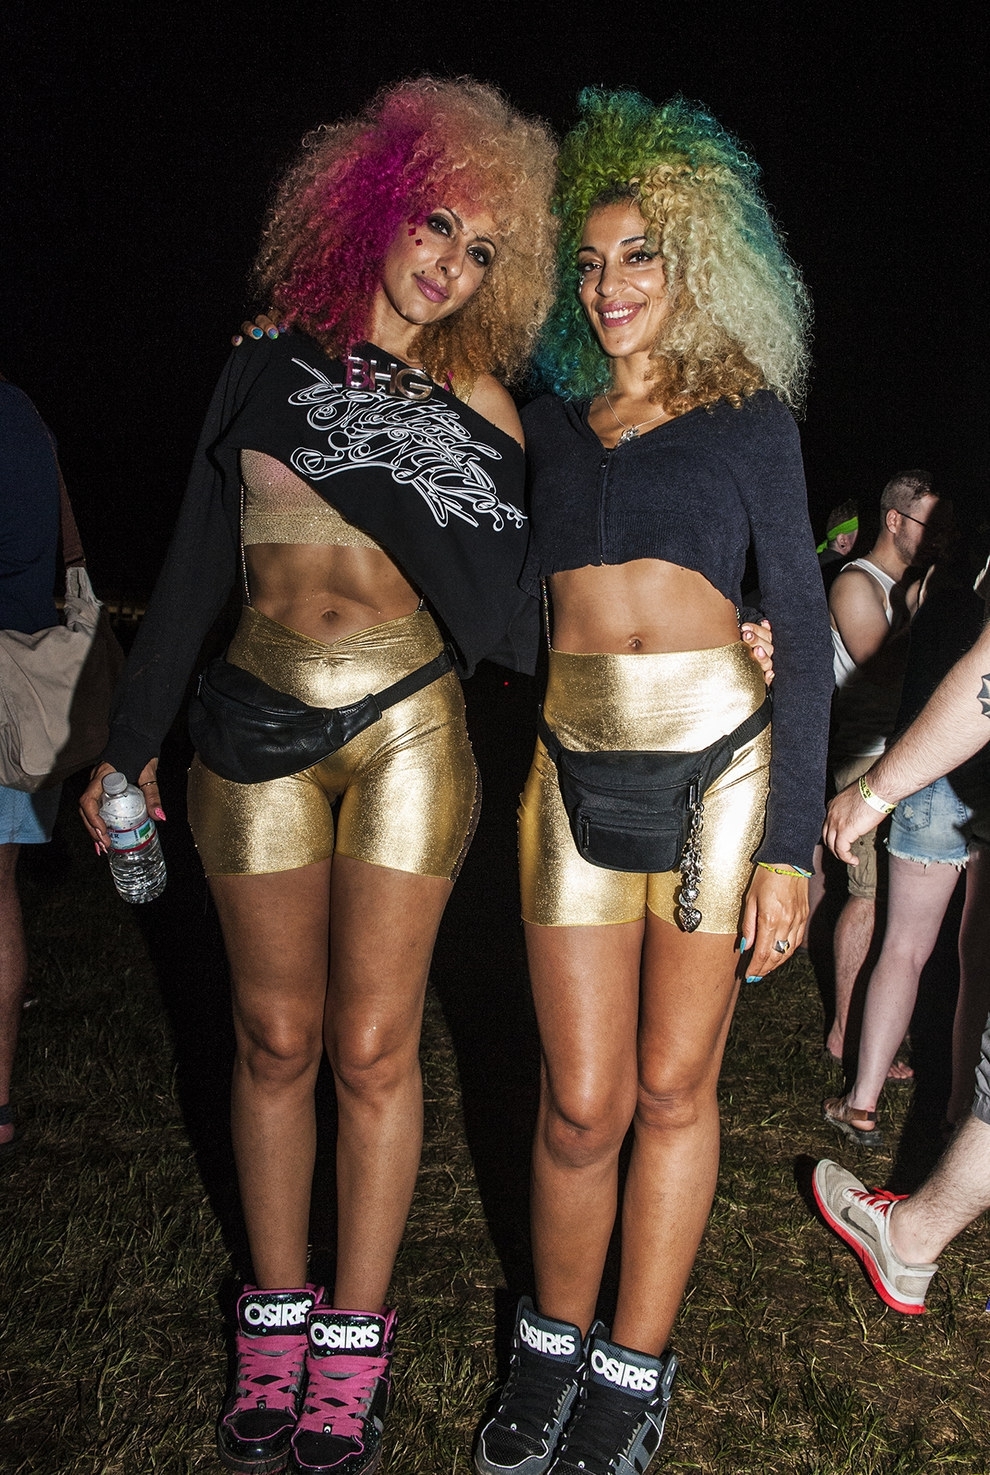 28 Photos That Perfectly Capture How Ridiculous People Are At Bonnaroo